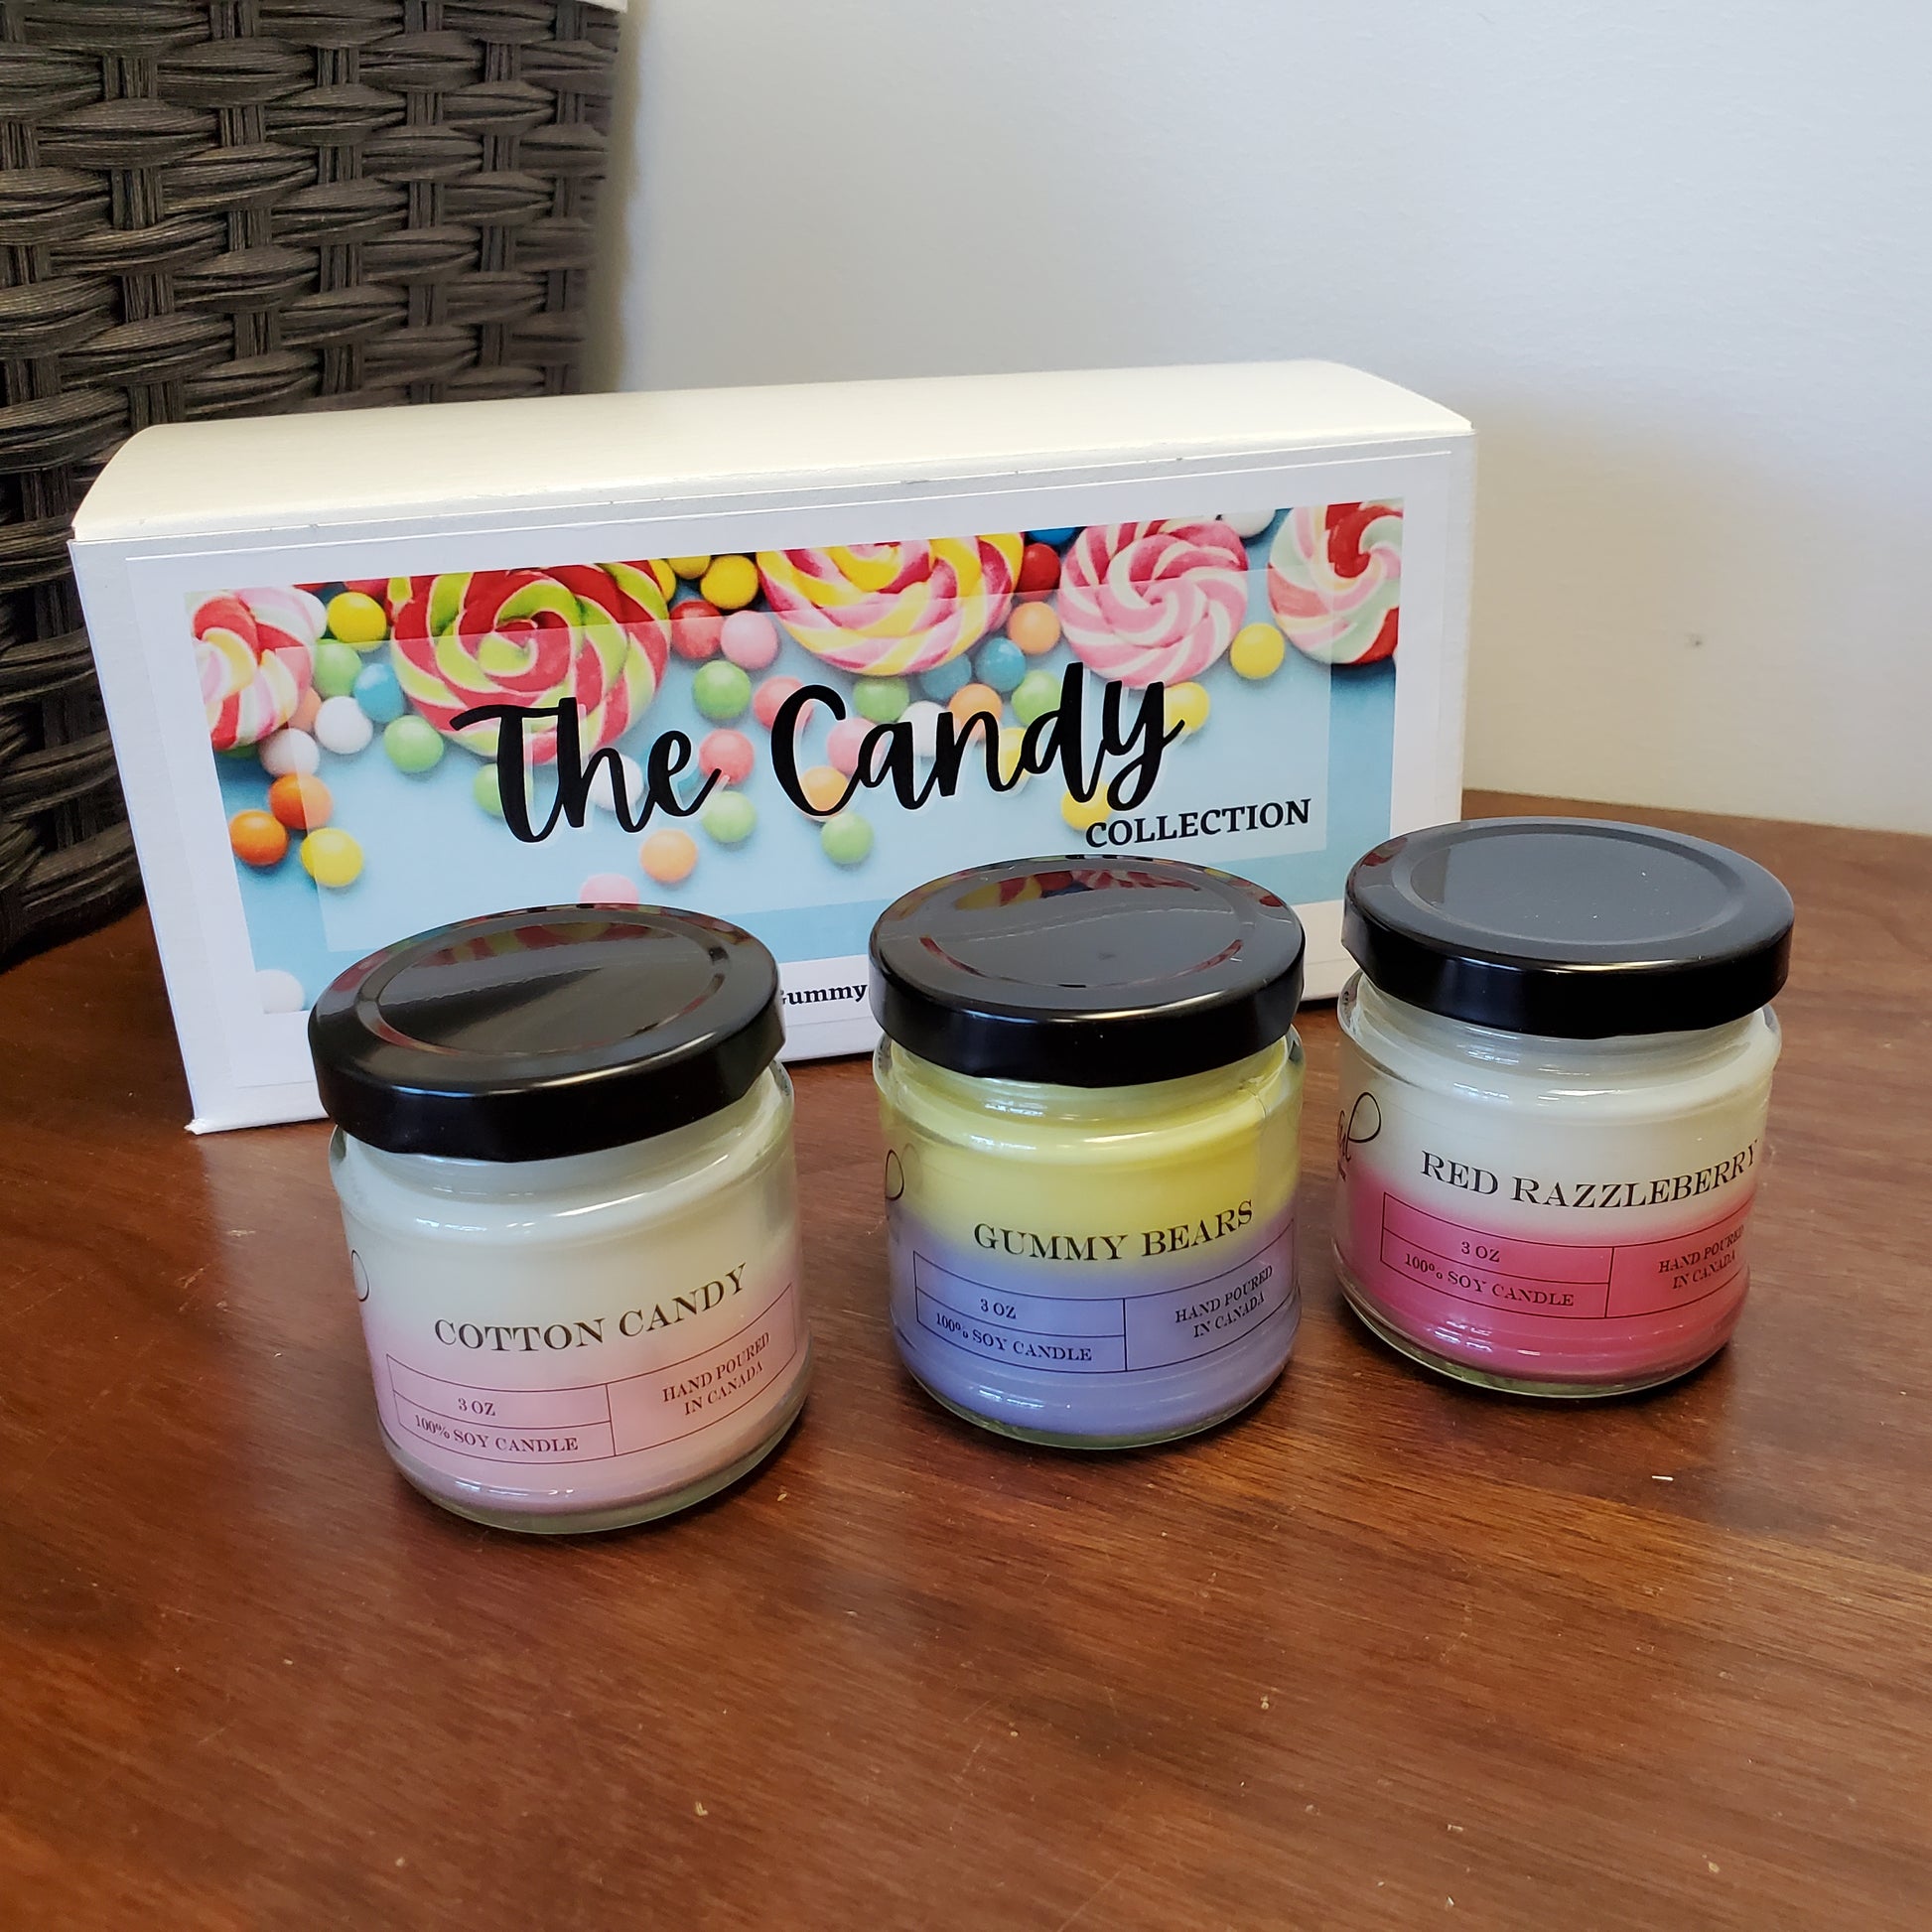 The Candy Collection Candle sample set includes Cotton Candy, Gummy Bears, and Red Razzleberries candles.